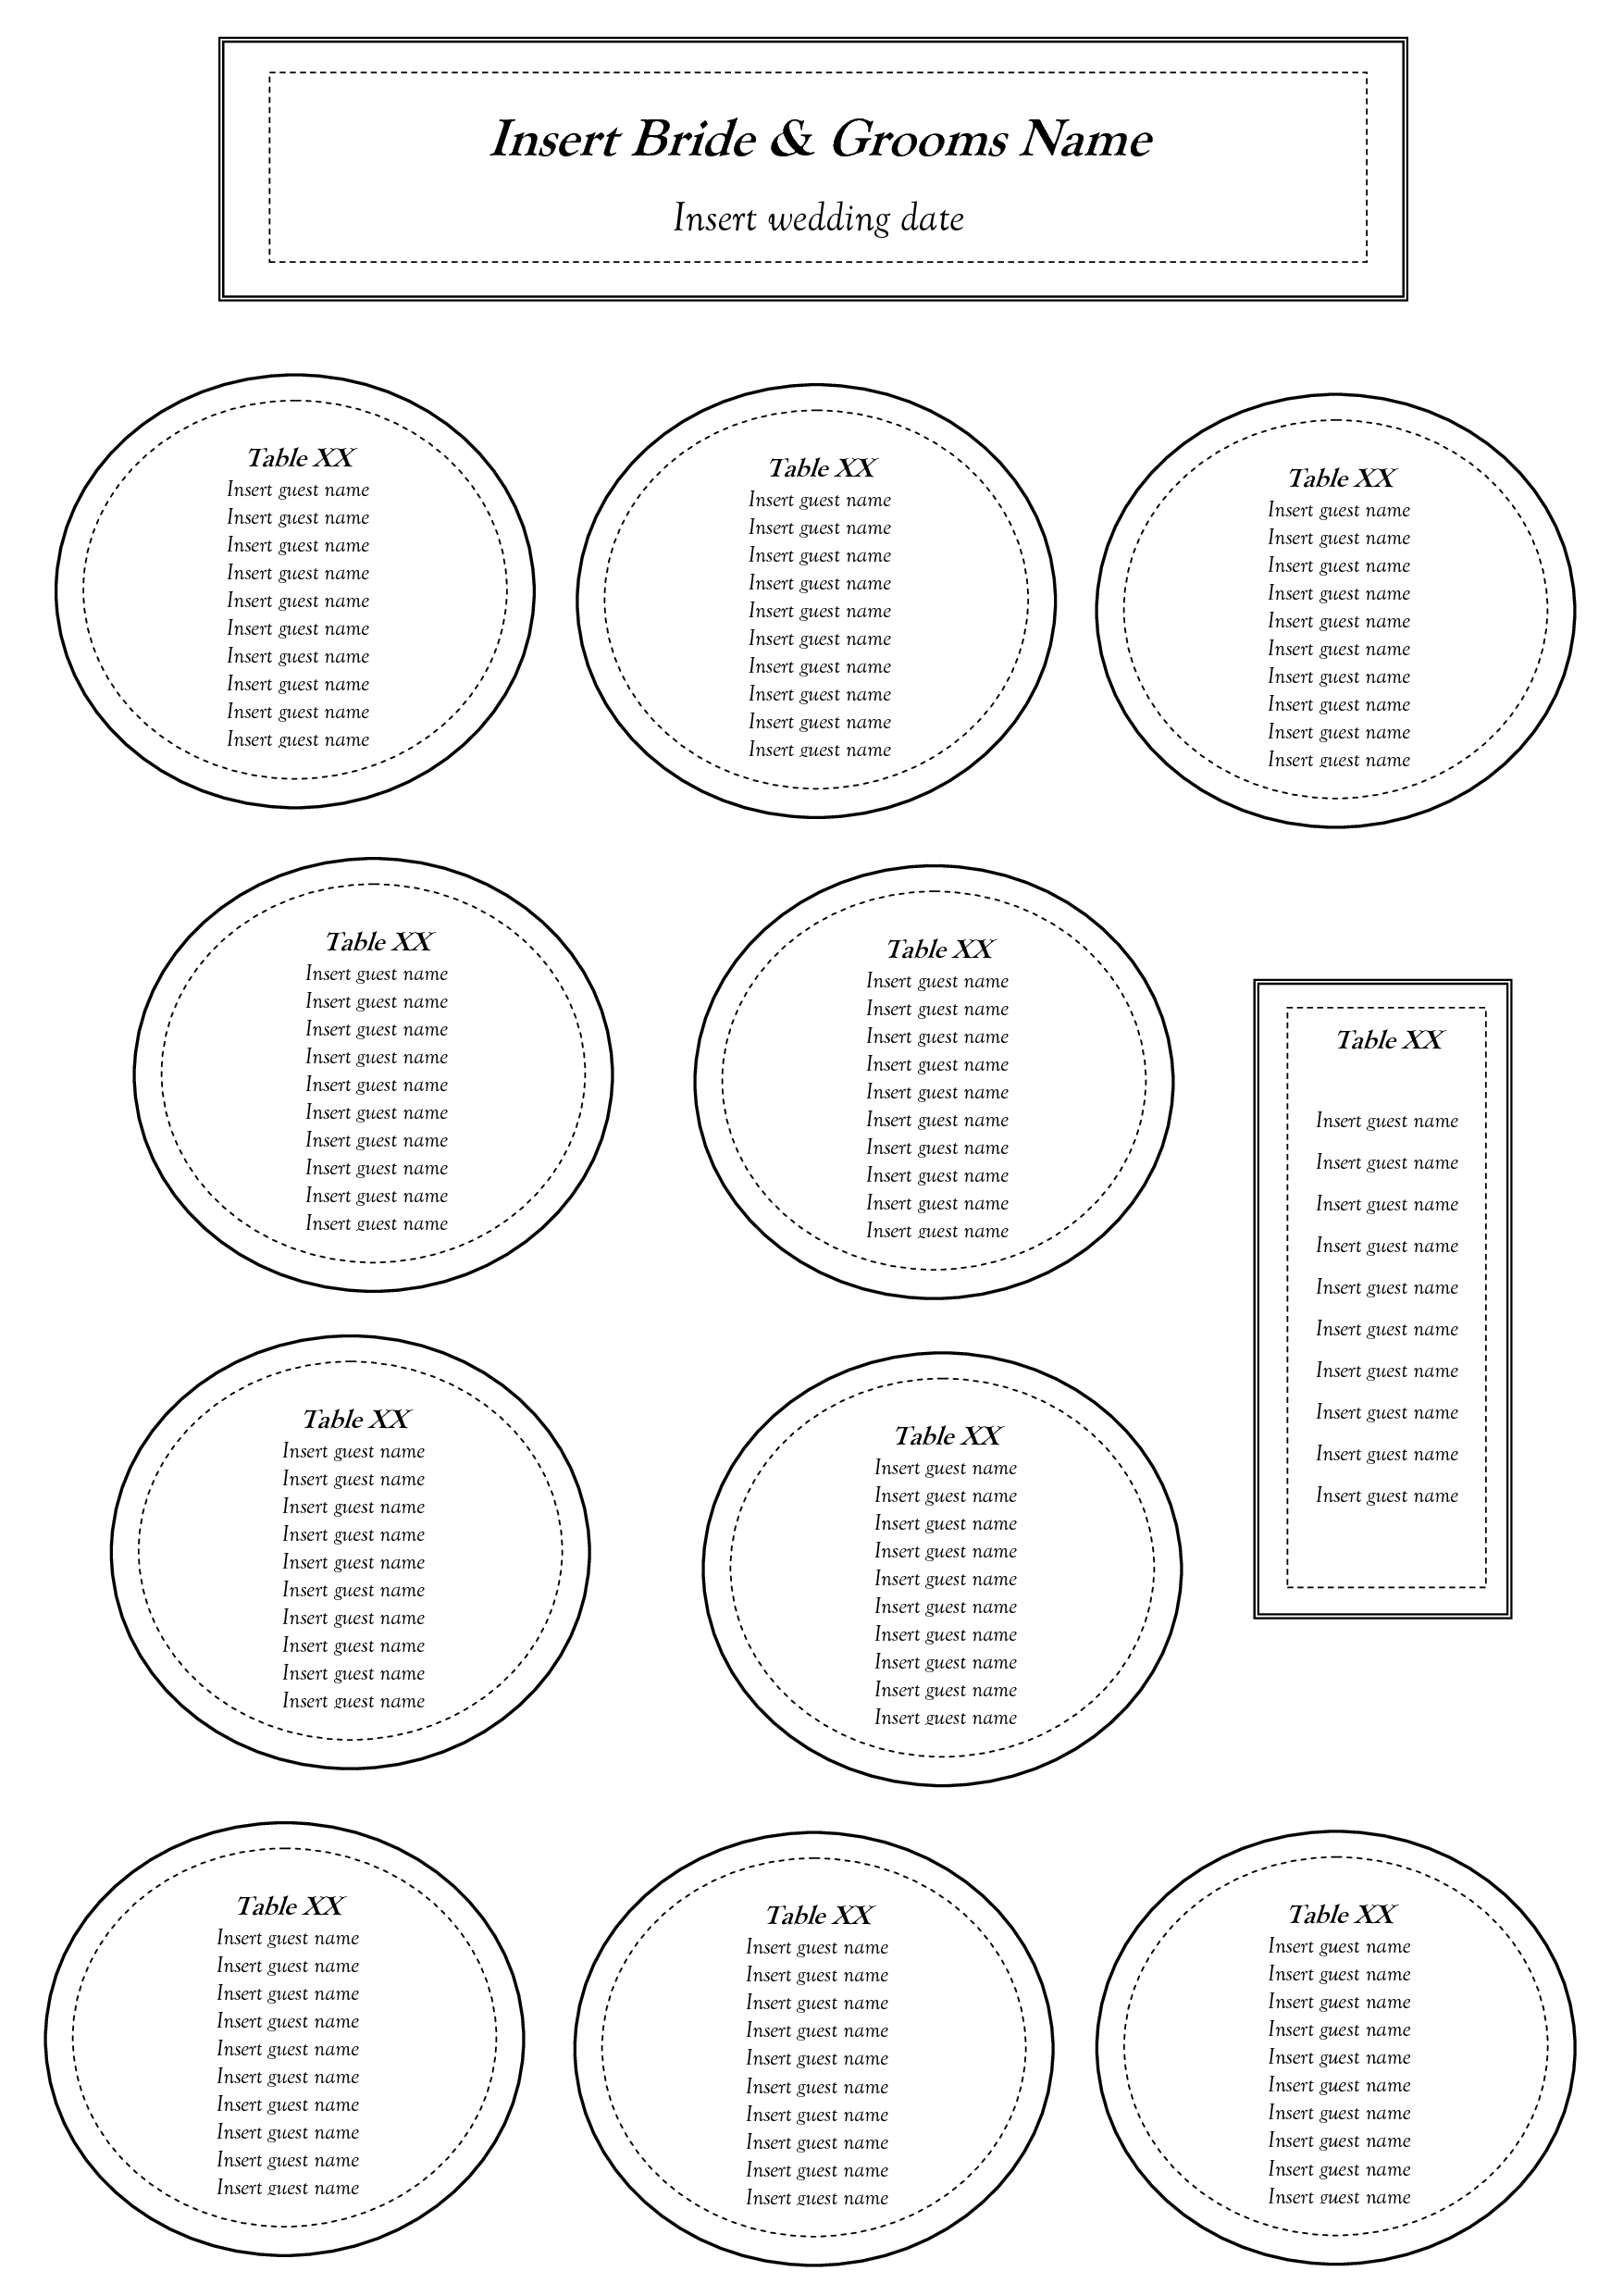 Free Table Seating Chart Template | Seating Charts In 2019 | Seating - Free Printable Wedding Seating Chart Template